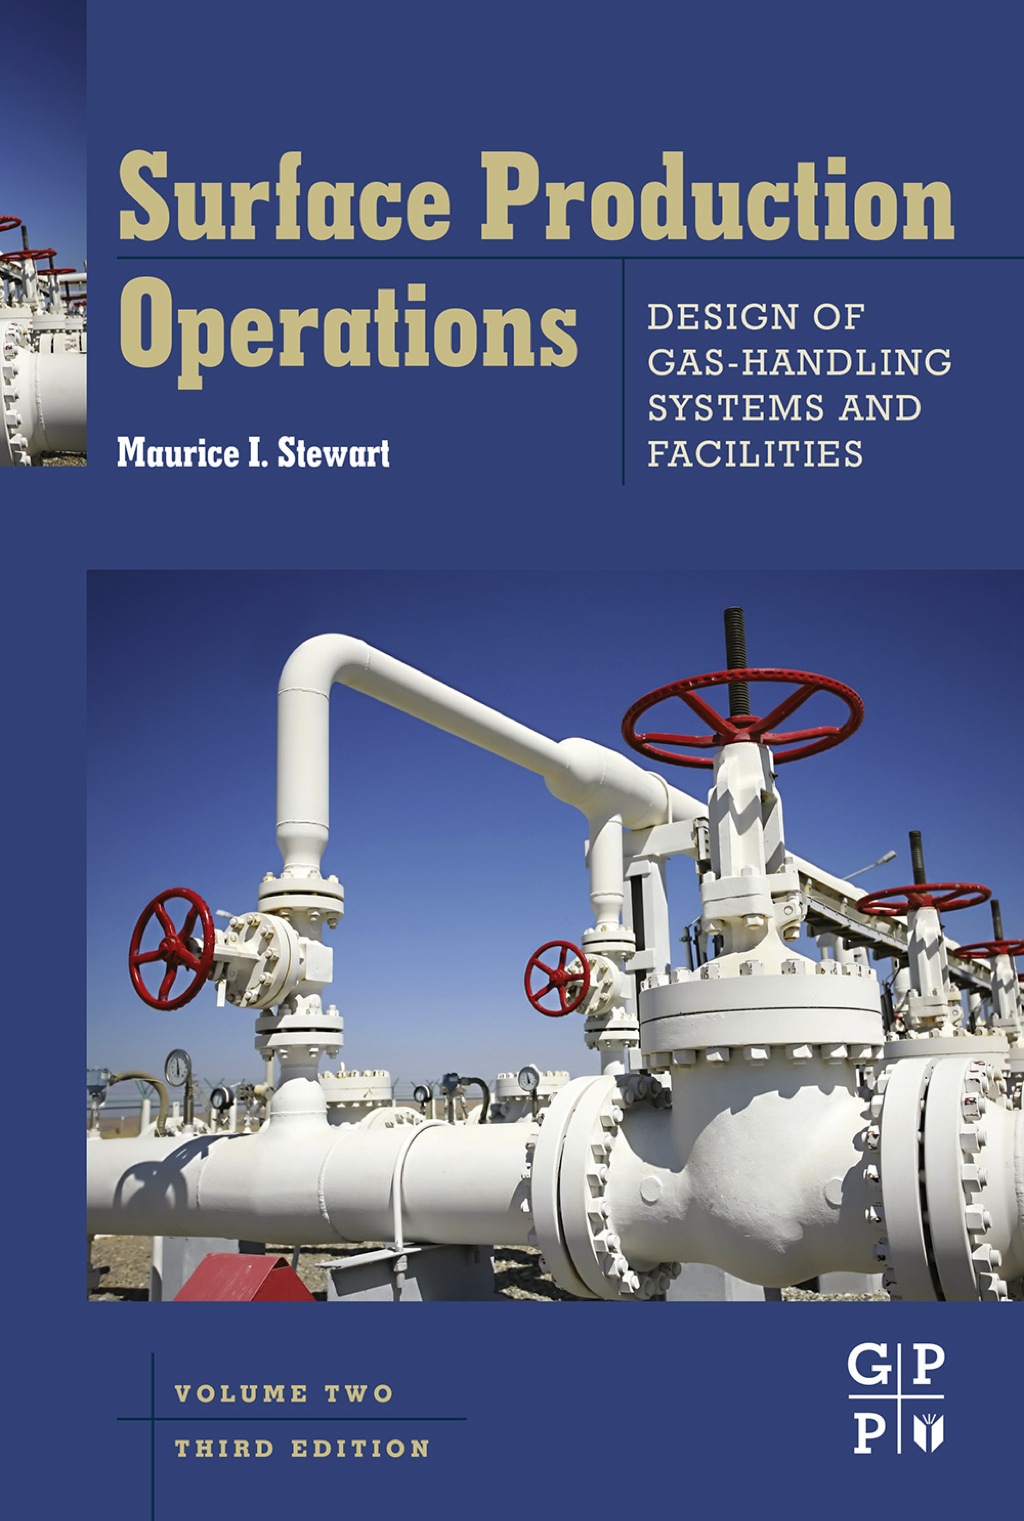 Surface Production Operations: Vol 2: Design of Gas-Handling Systems and Facilities - 3rd Edition (eBook Rental)